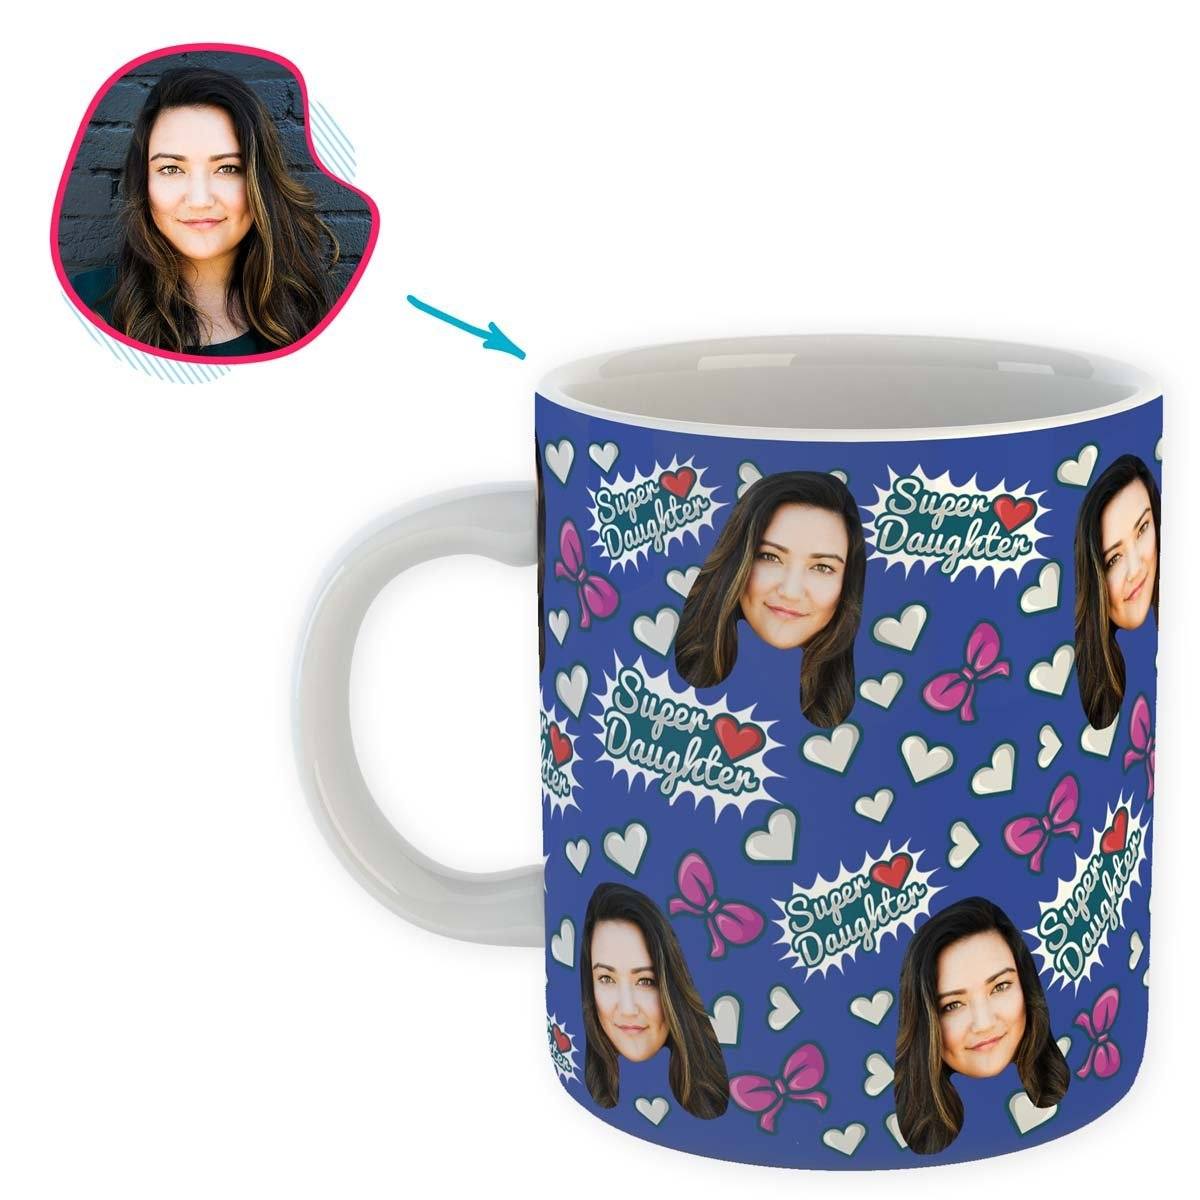 darkblue Super Daughter mug personalized with photo of face printed on it